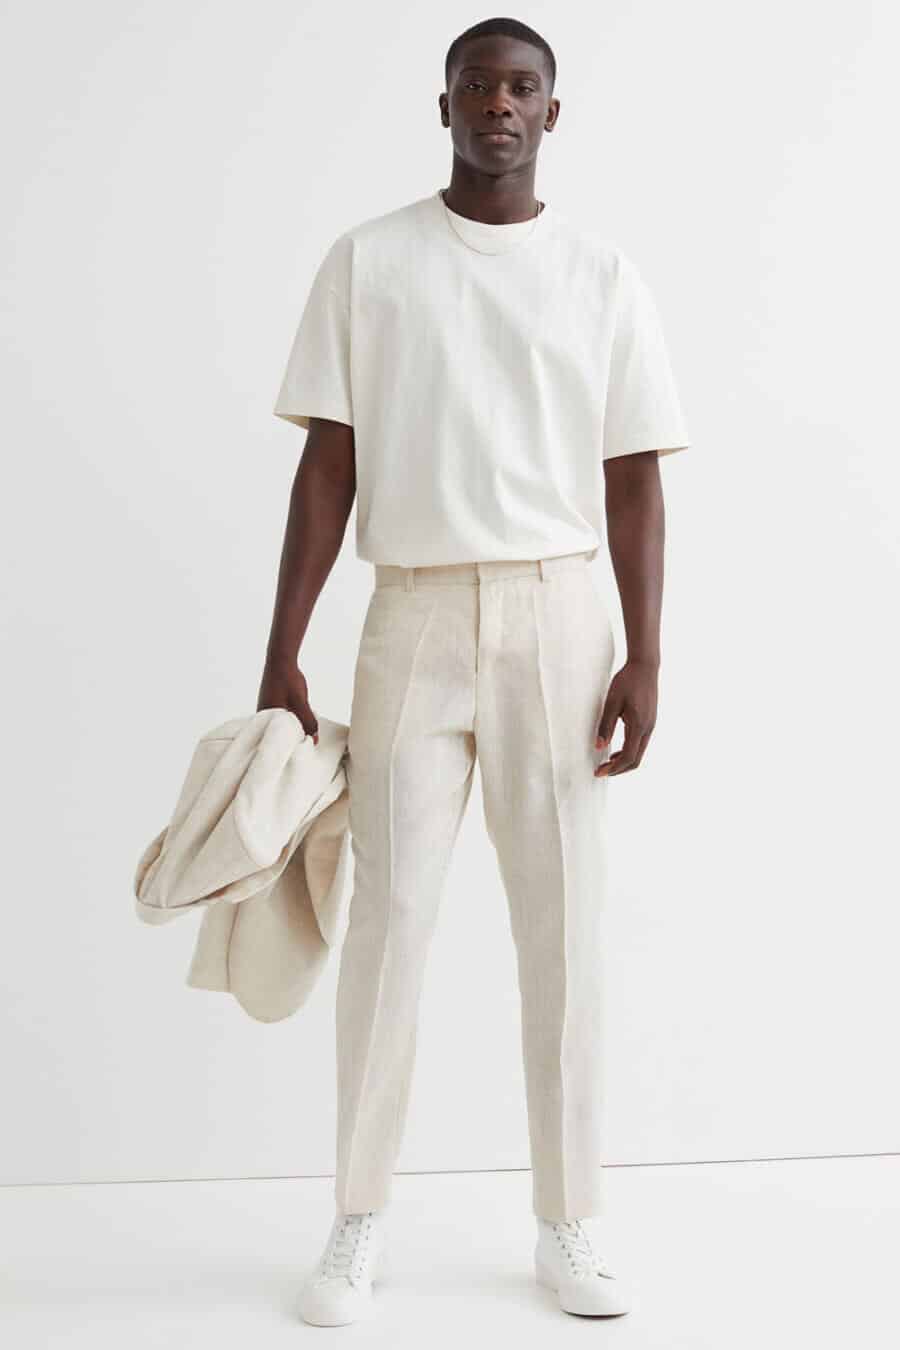 Men's stone linen suit outfit with white T-shirt and white canvas high top sneakers